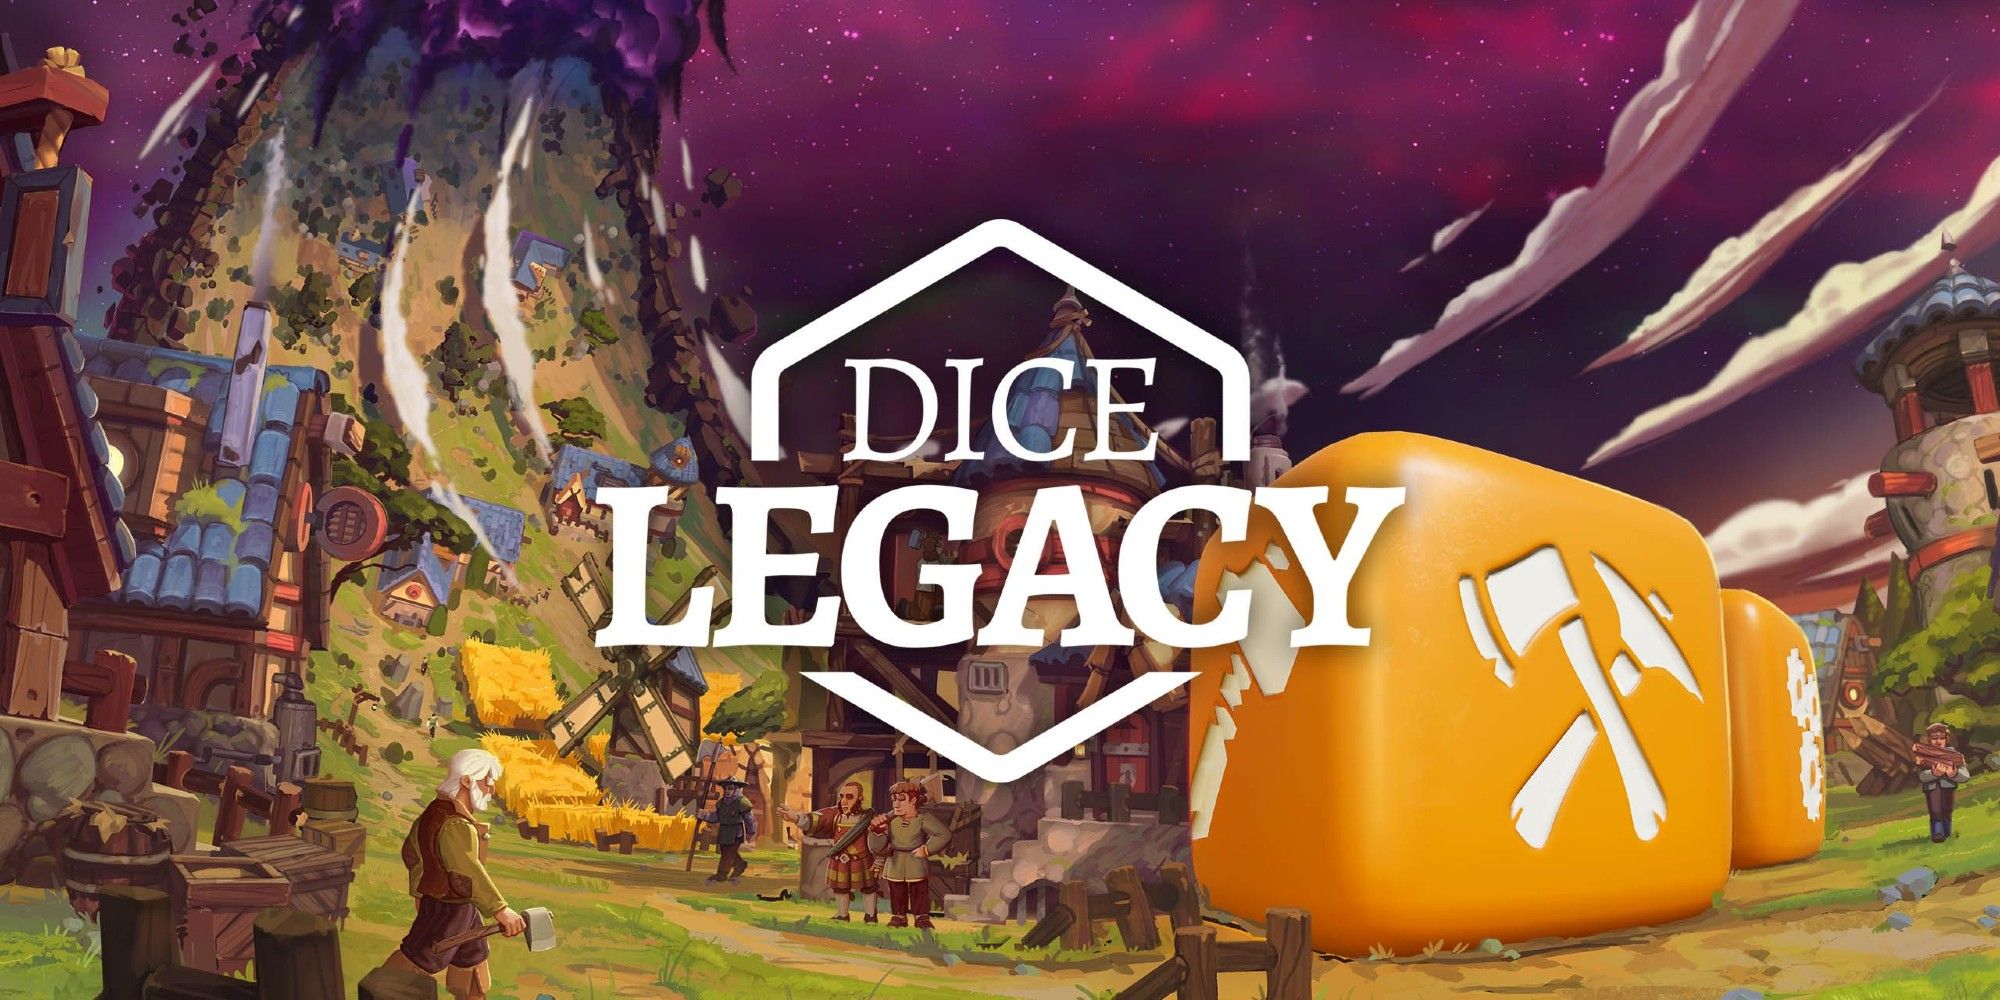 Dice Legacy Cover Art with yellow dice and ring world showing